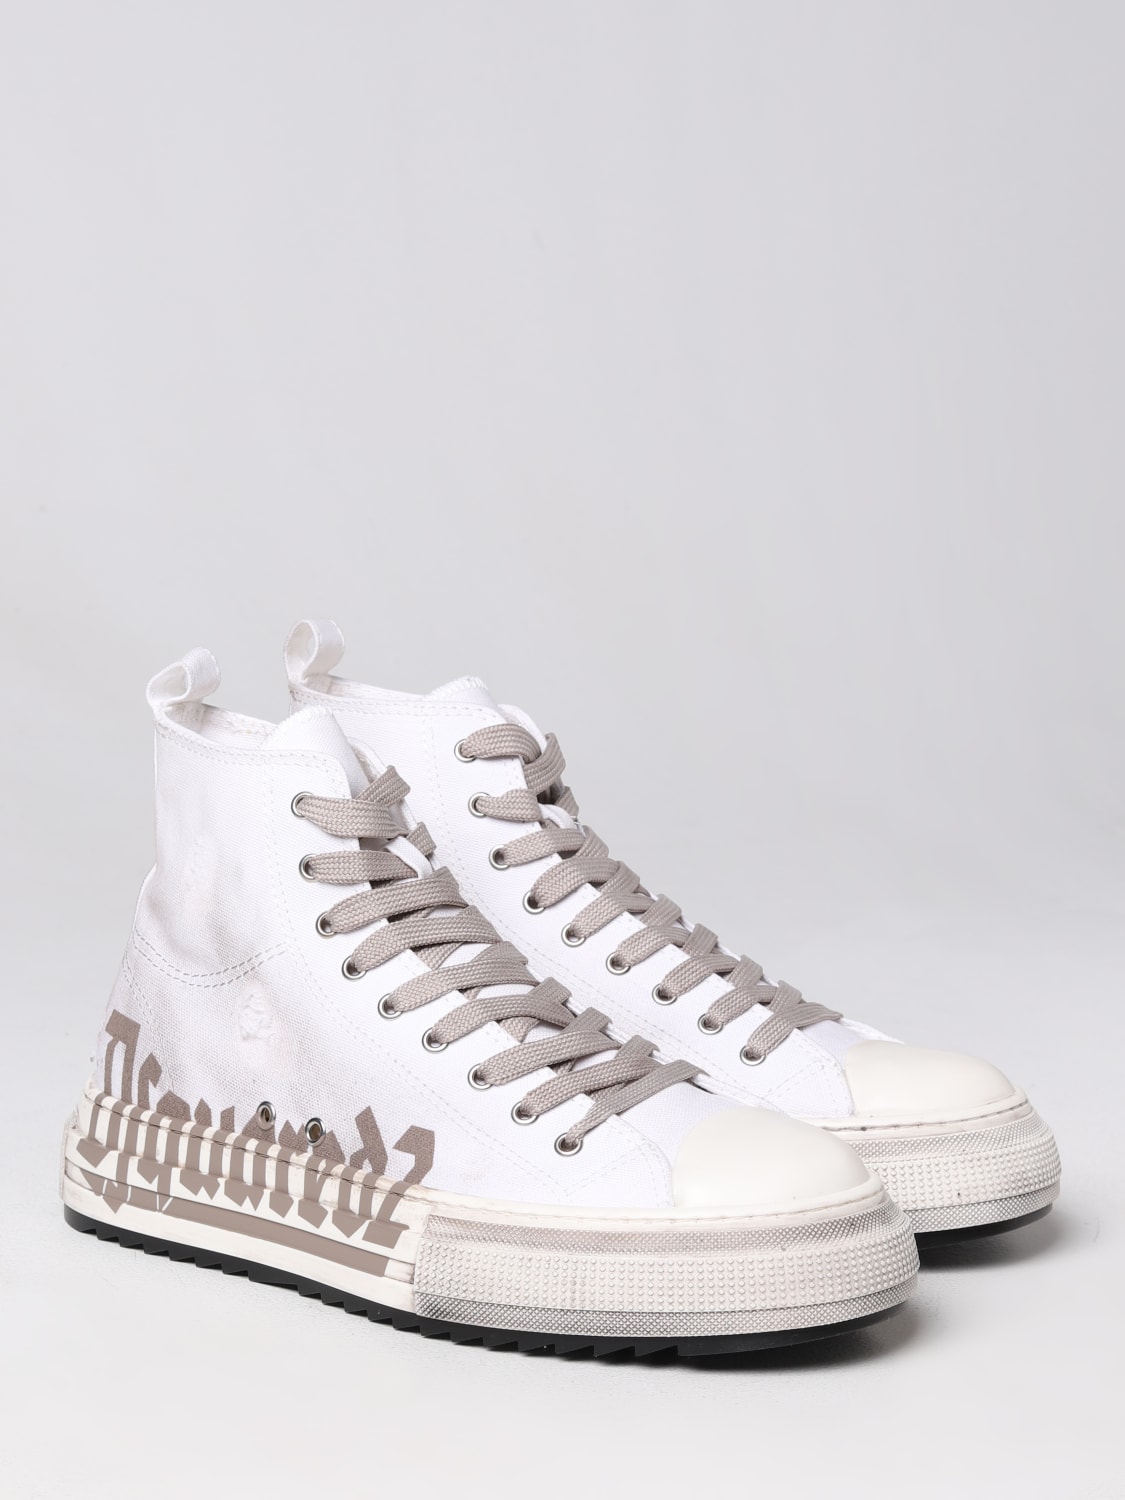 DSQUARED2: Berlin sneakers in fabric - Yellow Cream | Dsquared2 ...